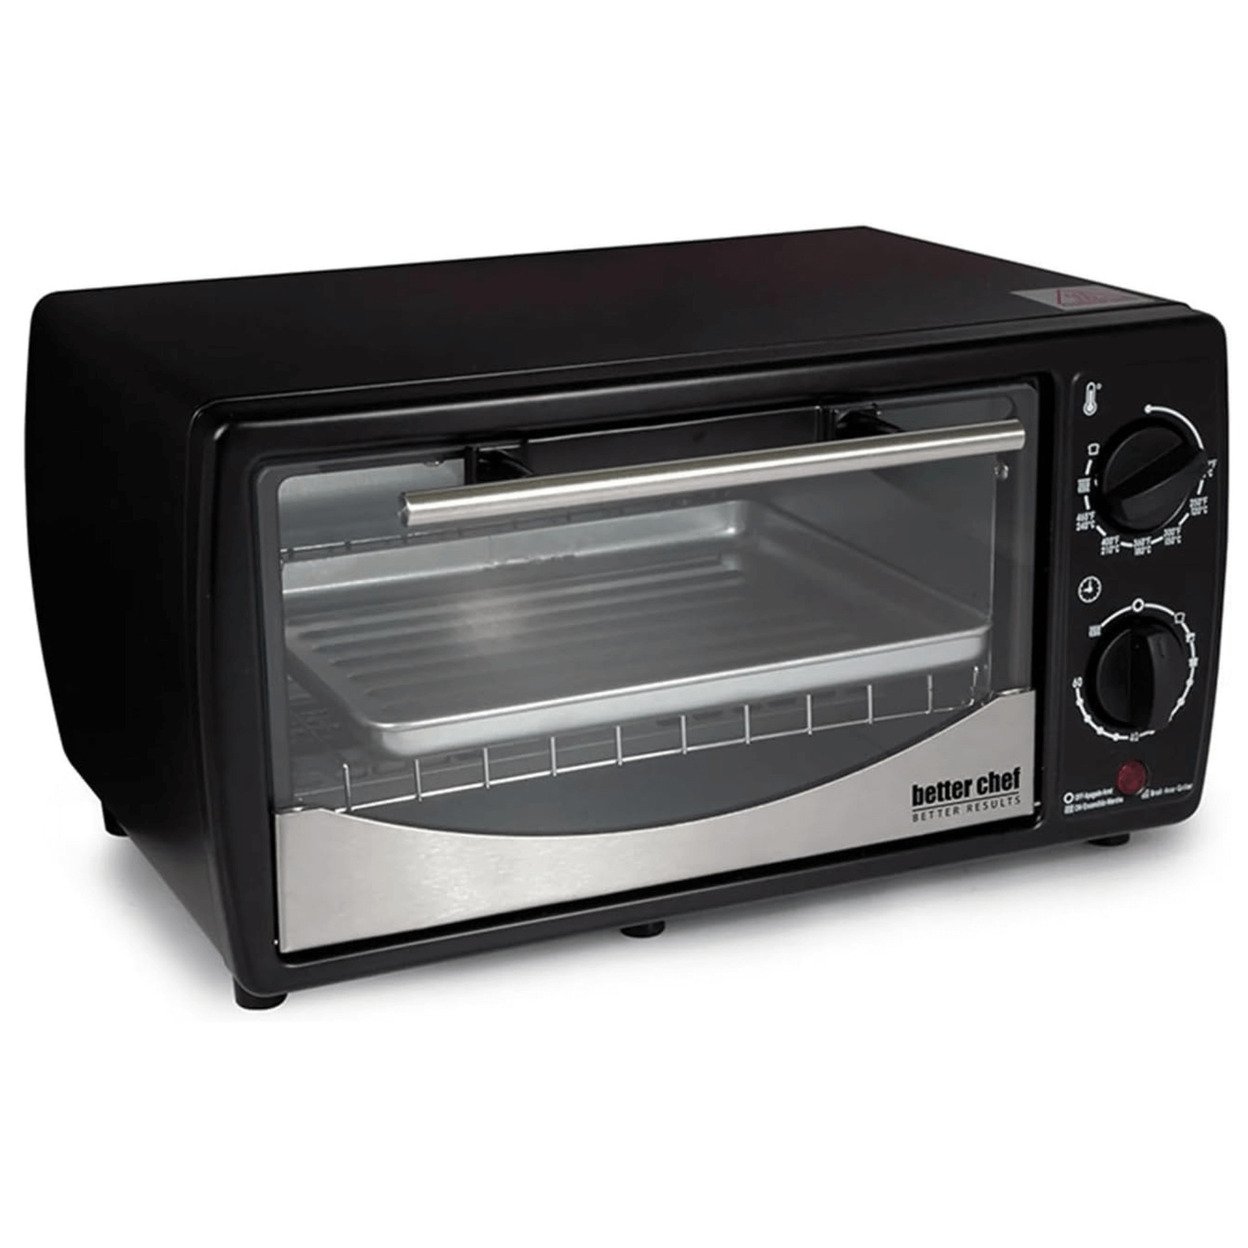 Better Chef   9L Toaster Oven Broiler with Slide-Out Rack and Bake Tray